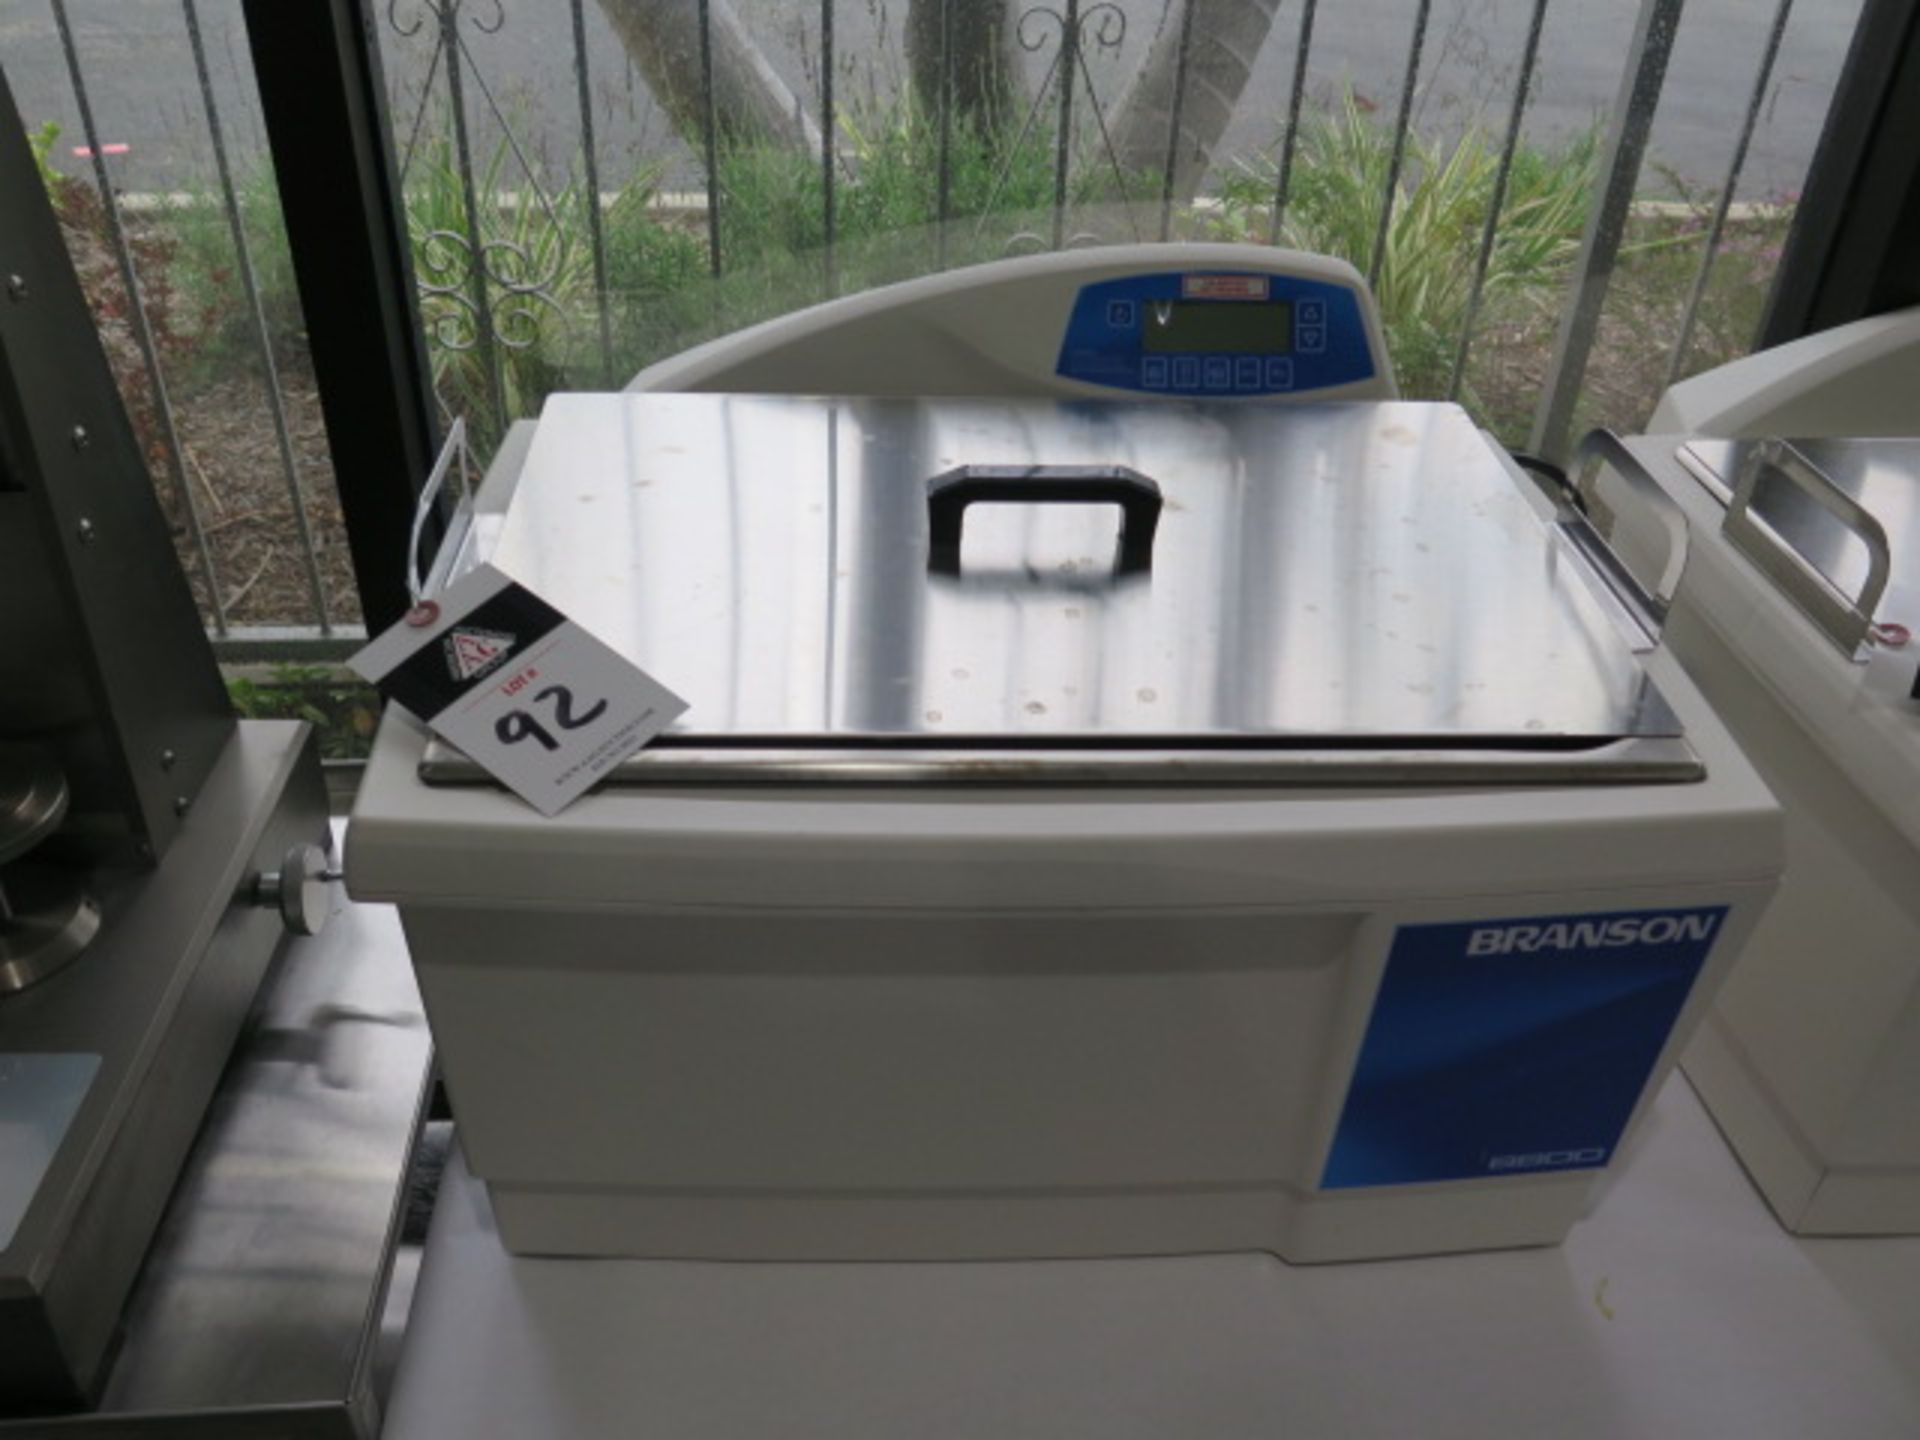 Branson 8800 Ultrasonic Cleaning Tank (SOLD AS-IS - NO WARRANTY) - Image 2 of 6